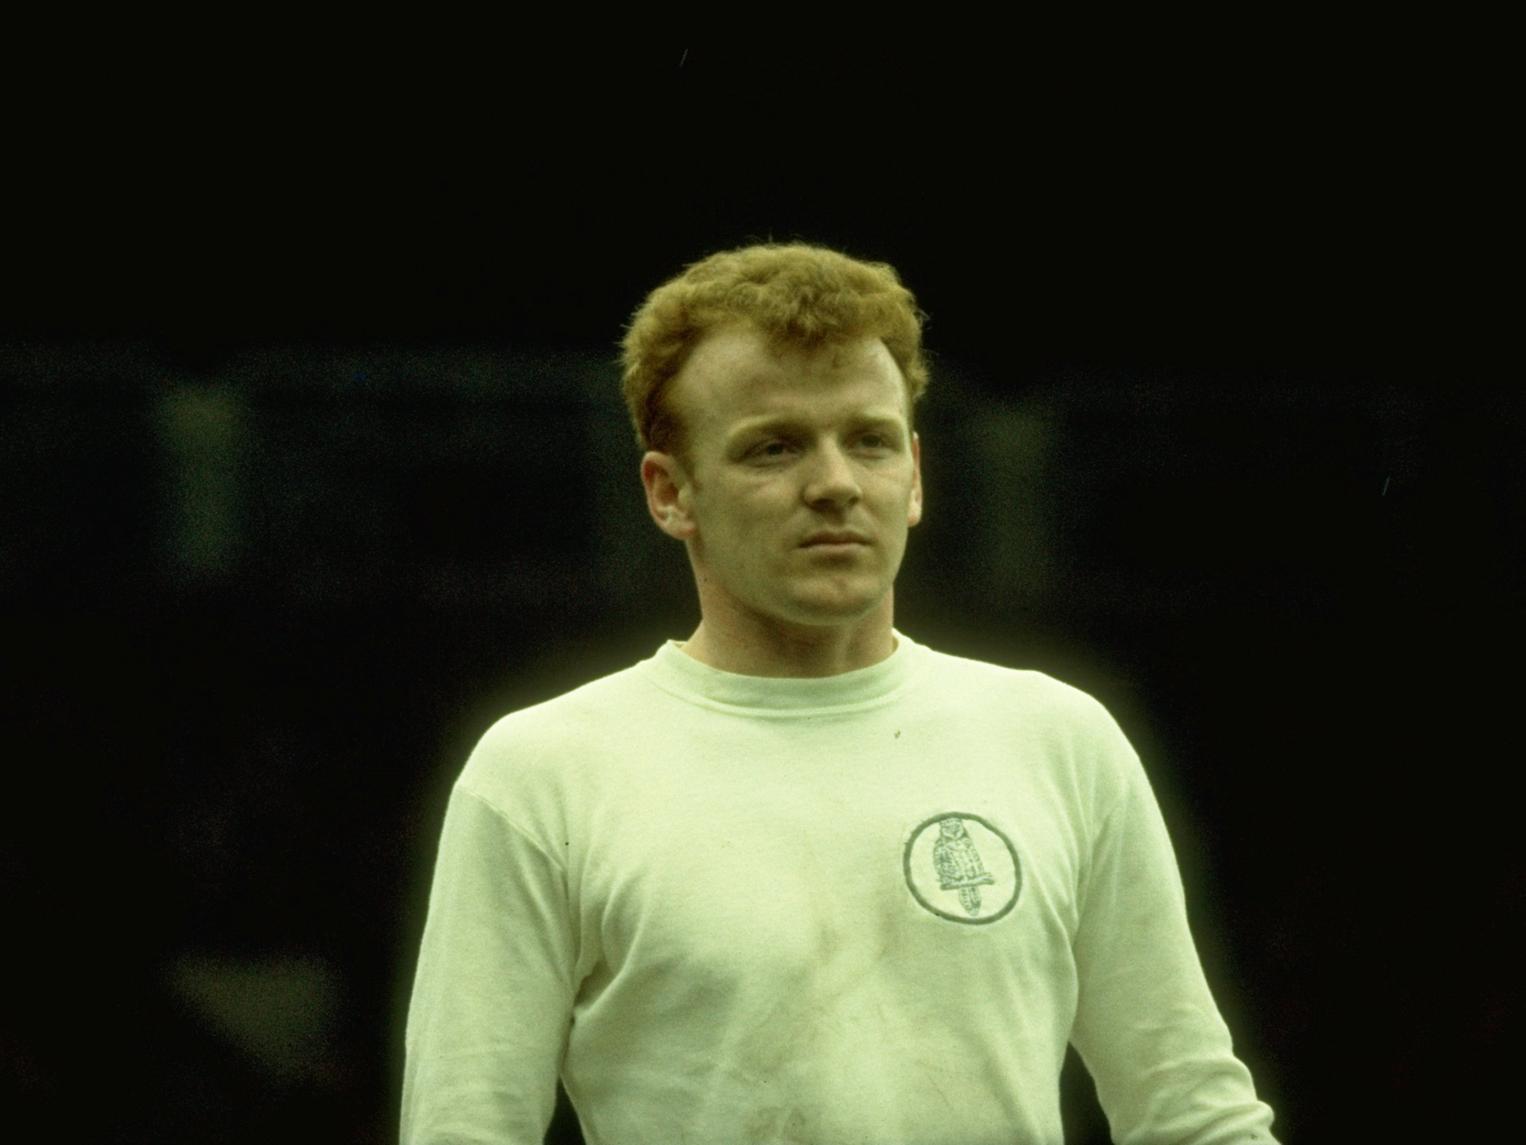 Played for Leeds United from 1959 to 1976, and captained the side during this time, which was the most successful period of the club's history.